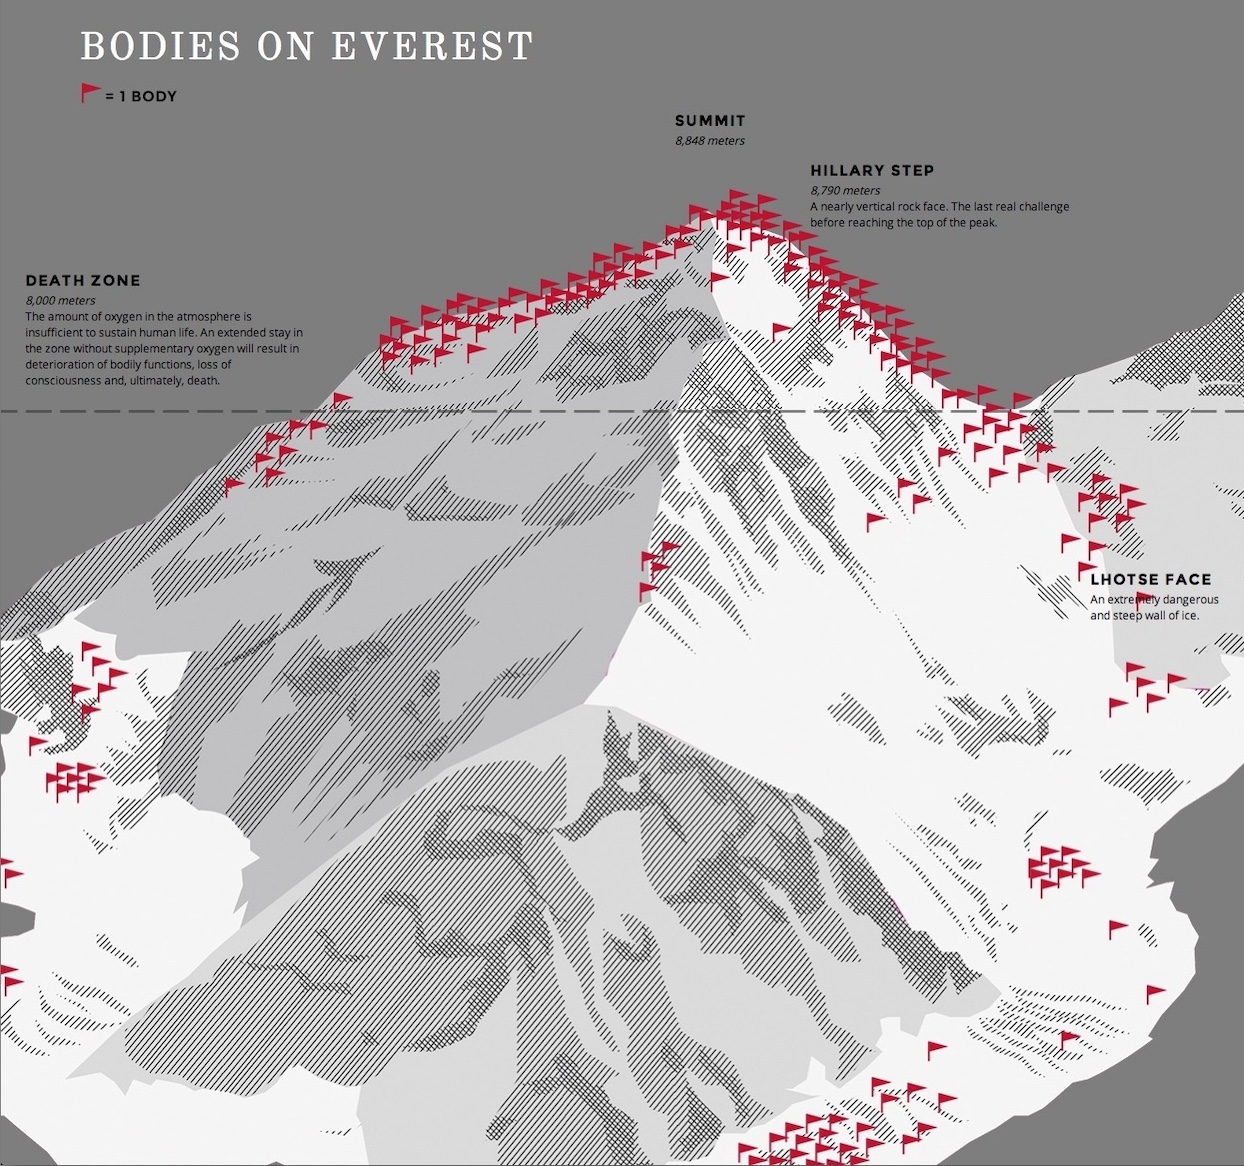 A map showing the locations of bodies on everest.